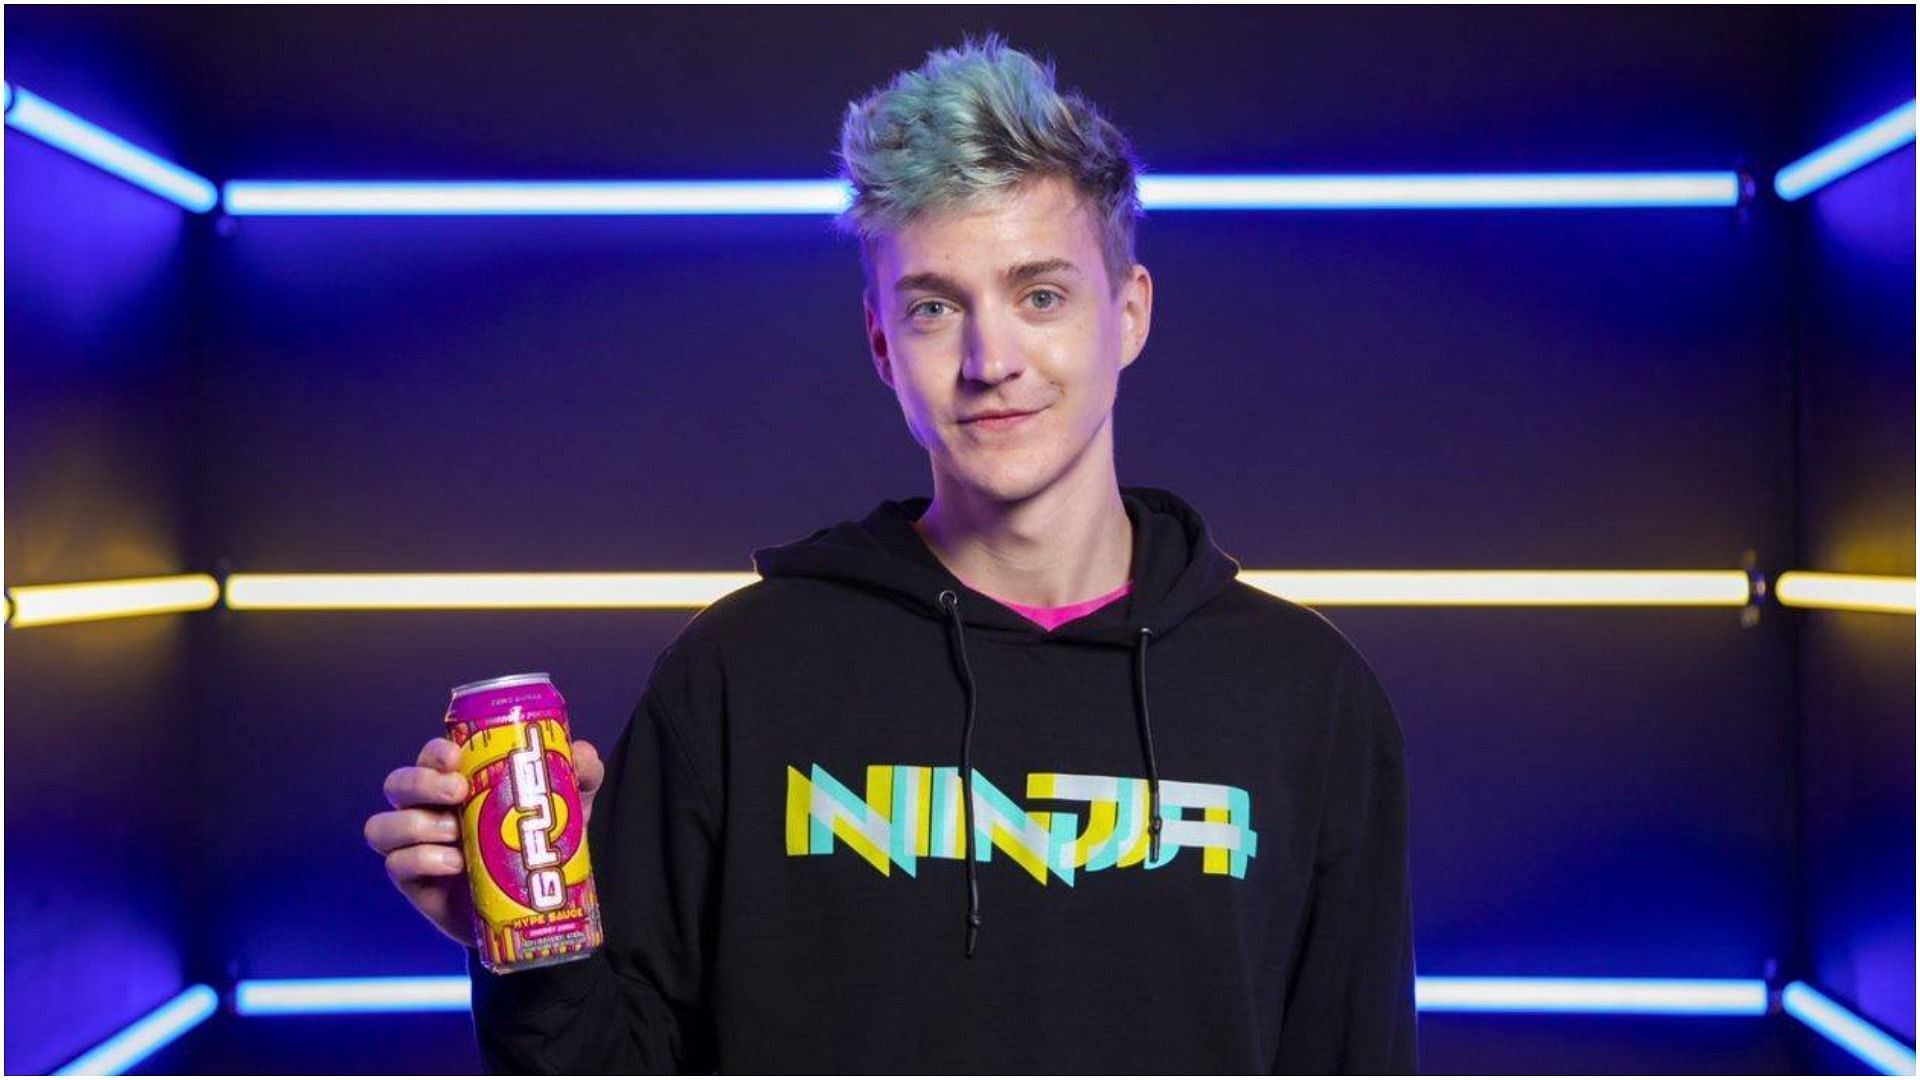 Ninja and GFUEL&#039;s sponsorship announcement has garnered a mixture of reactions from fans (Image via GFUEL)